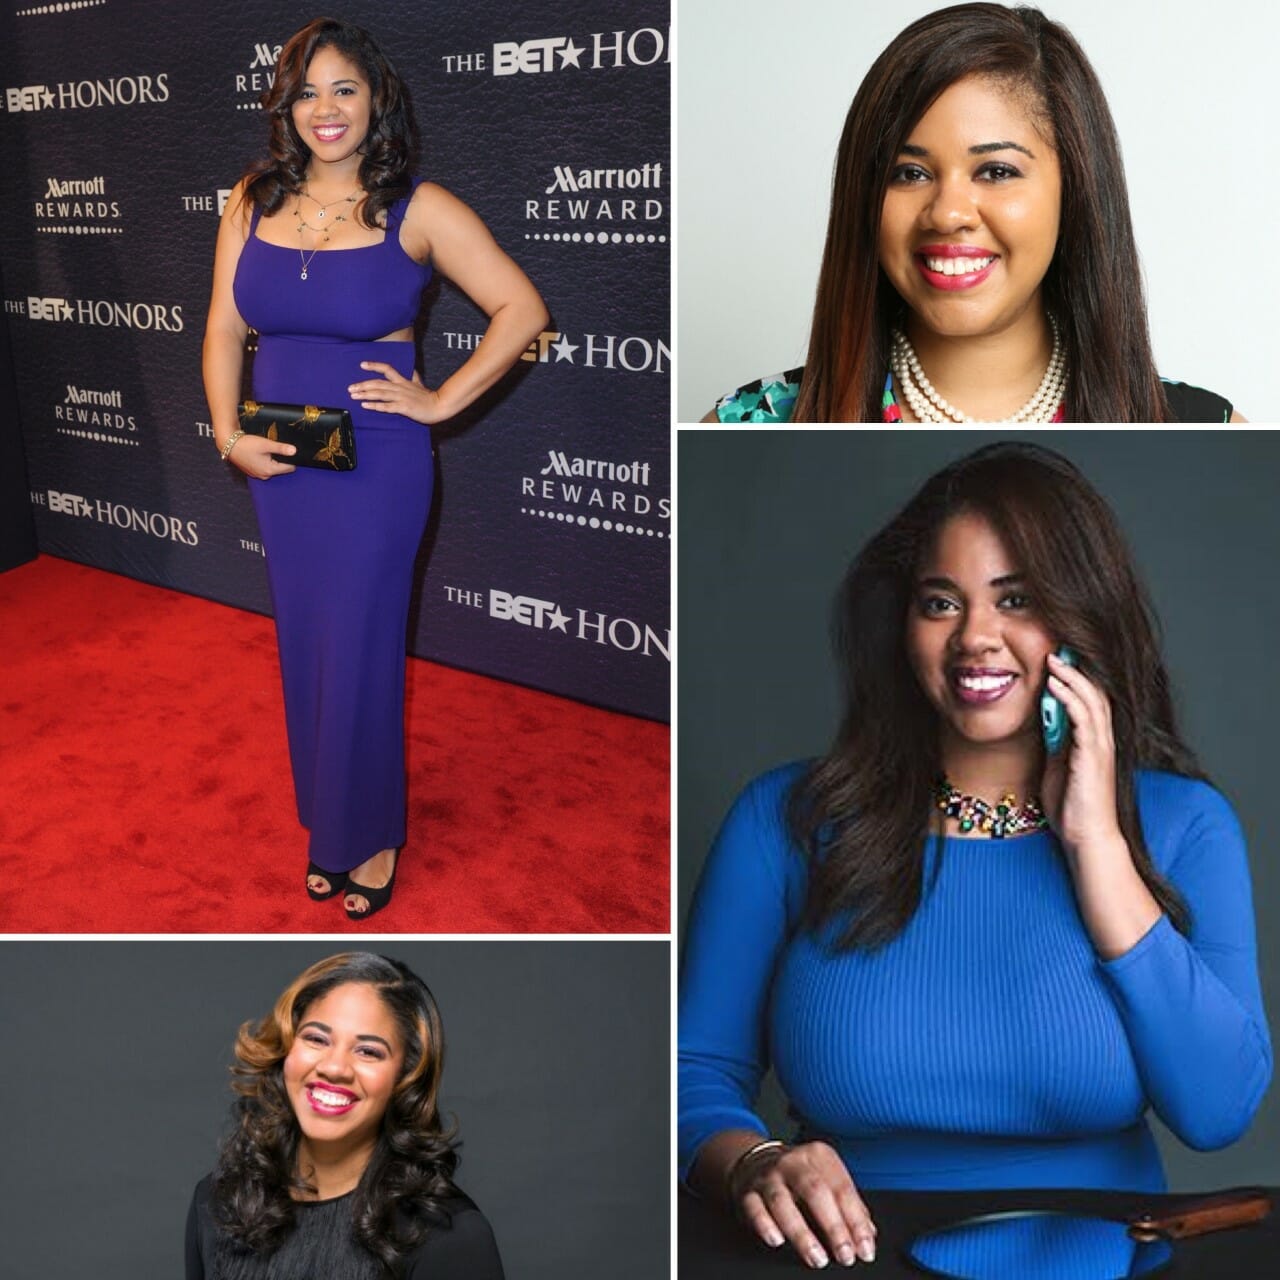 A black woman with long hair in a blue dress at an awards ceremony, and in a blue sweater talking on a cell phone.